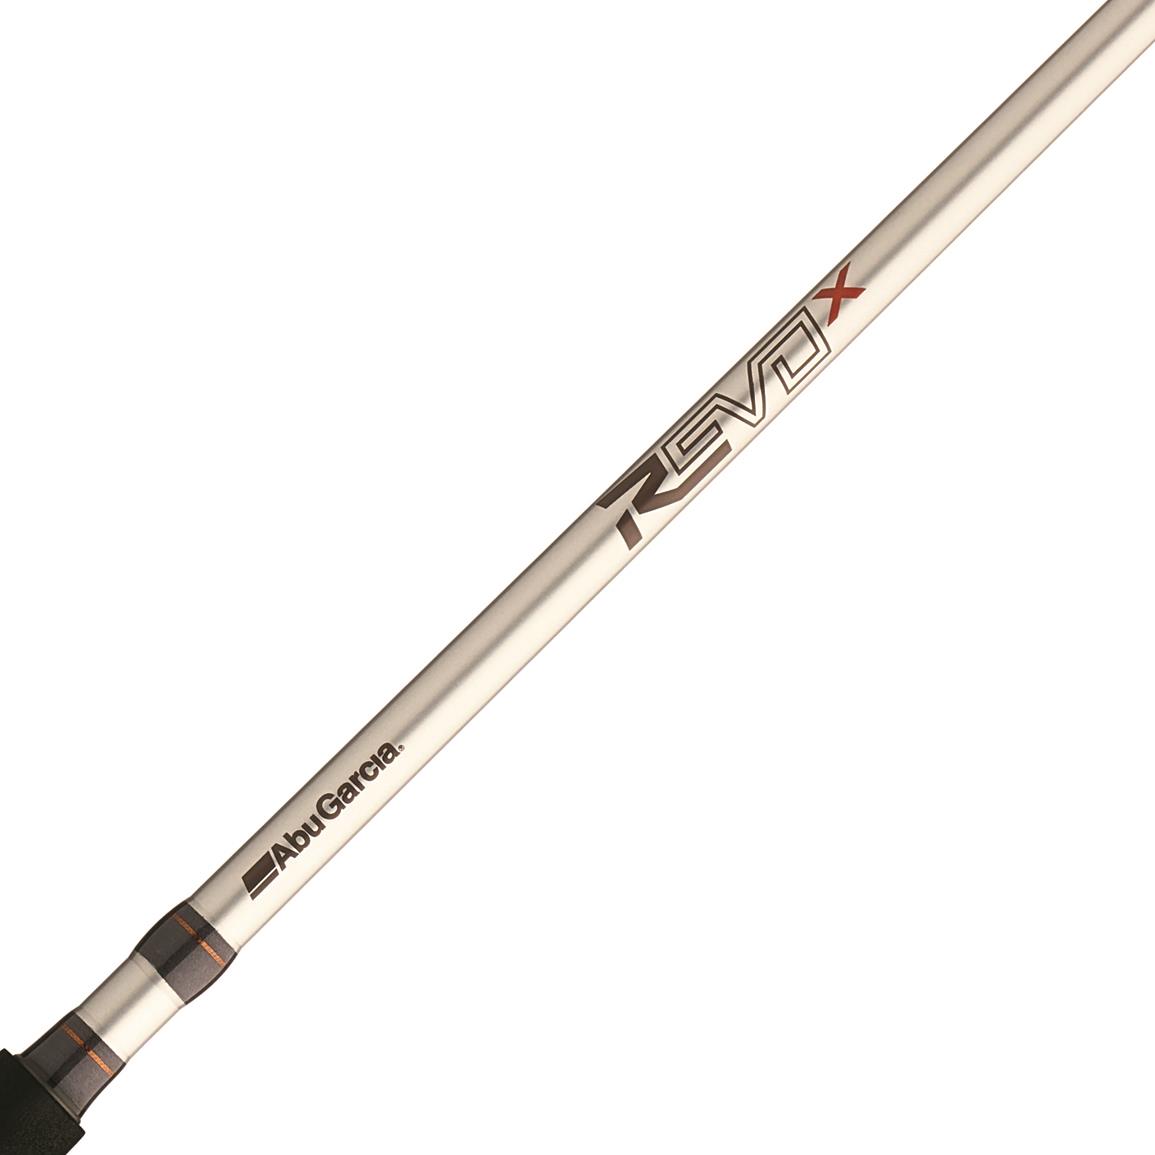 Shakespeare Wild Series Salmon and Steelhead Spinning Combo - 717559, Spinning  Combos at Sportsman's Guide